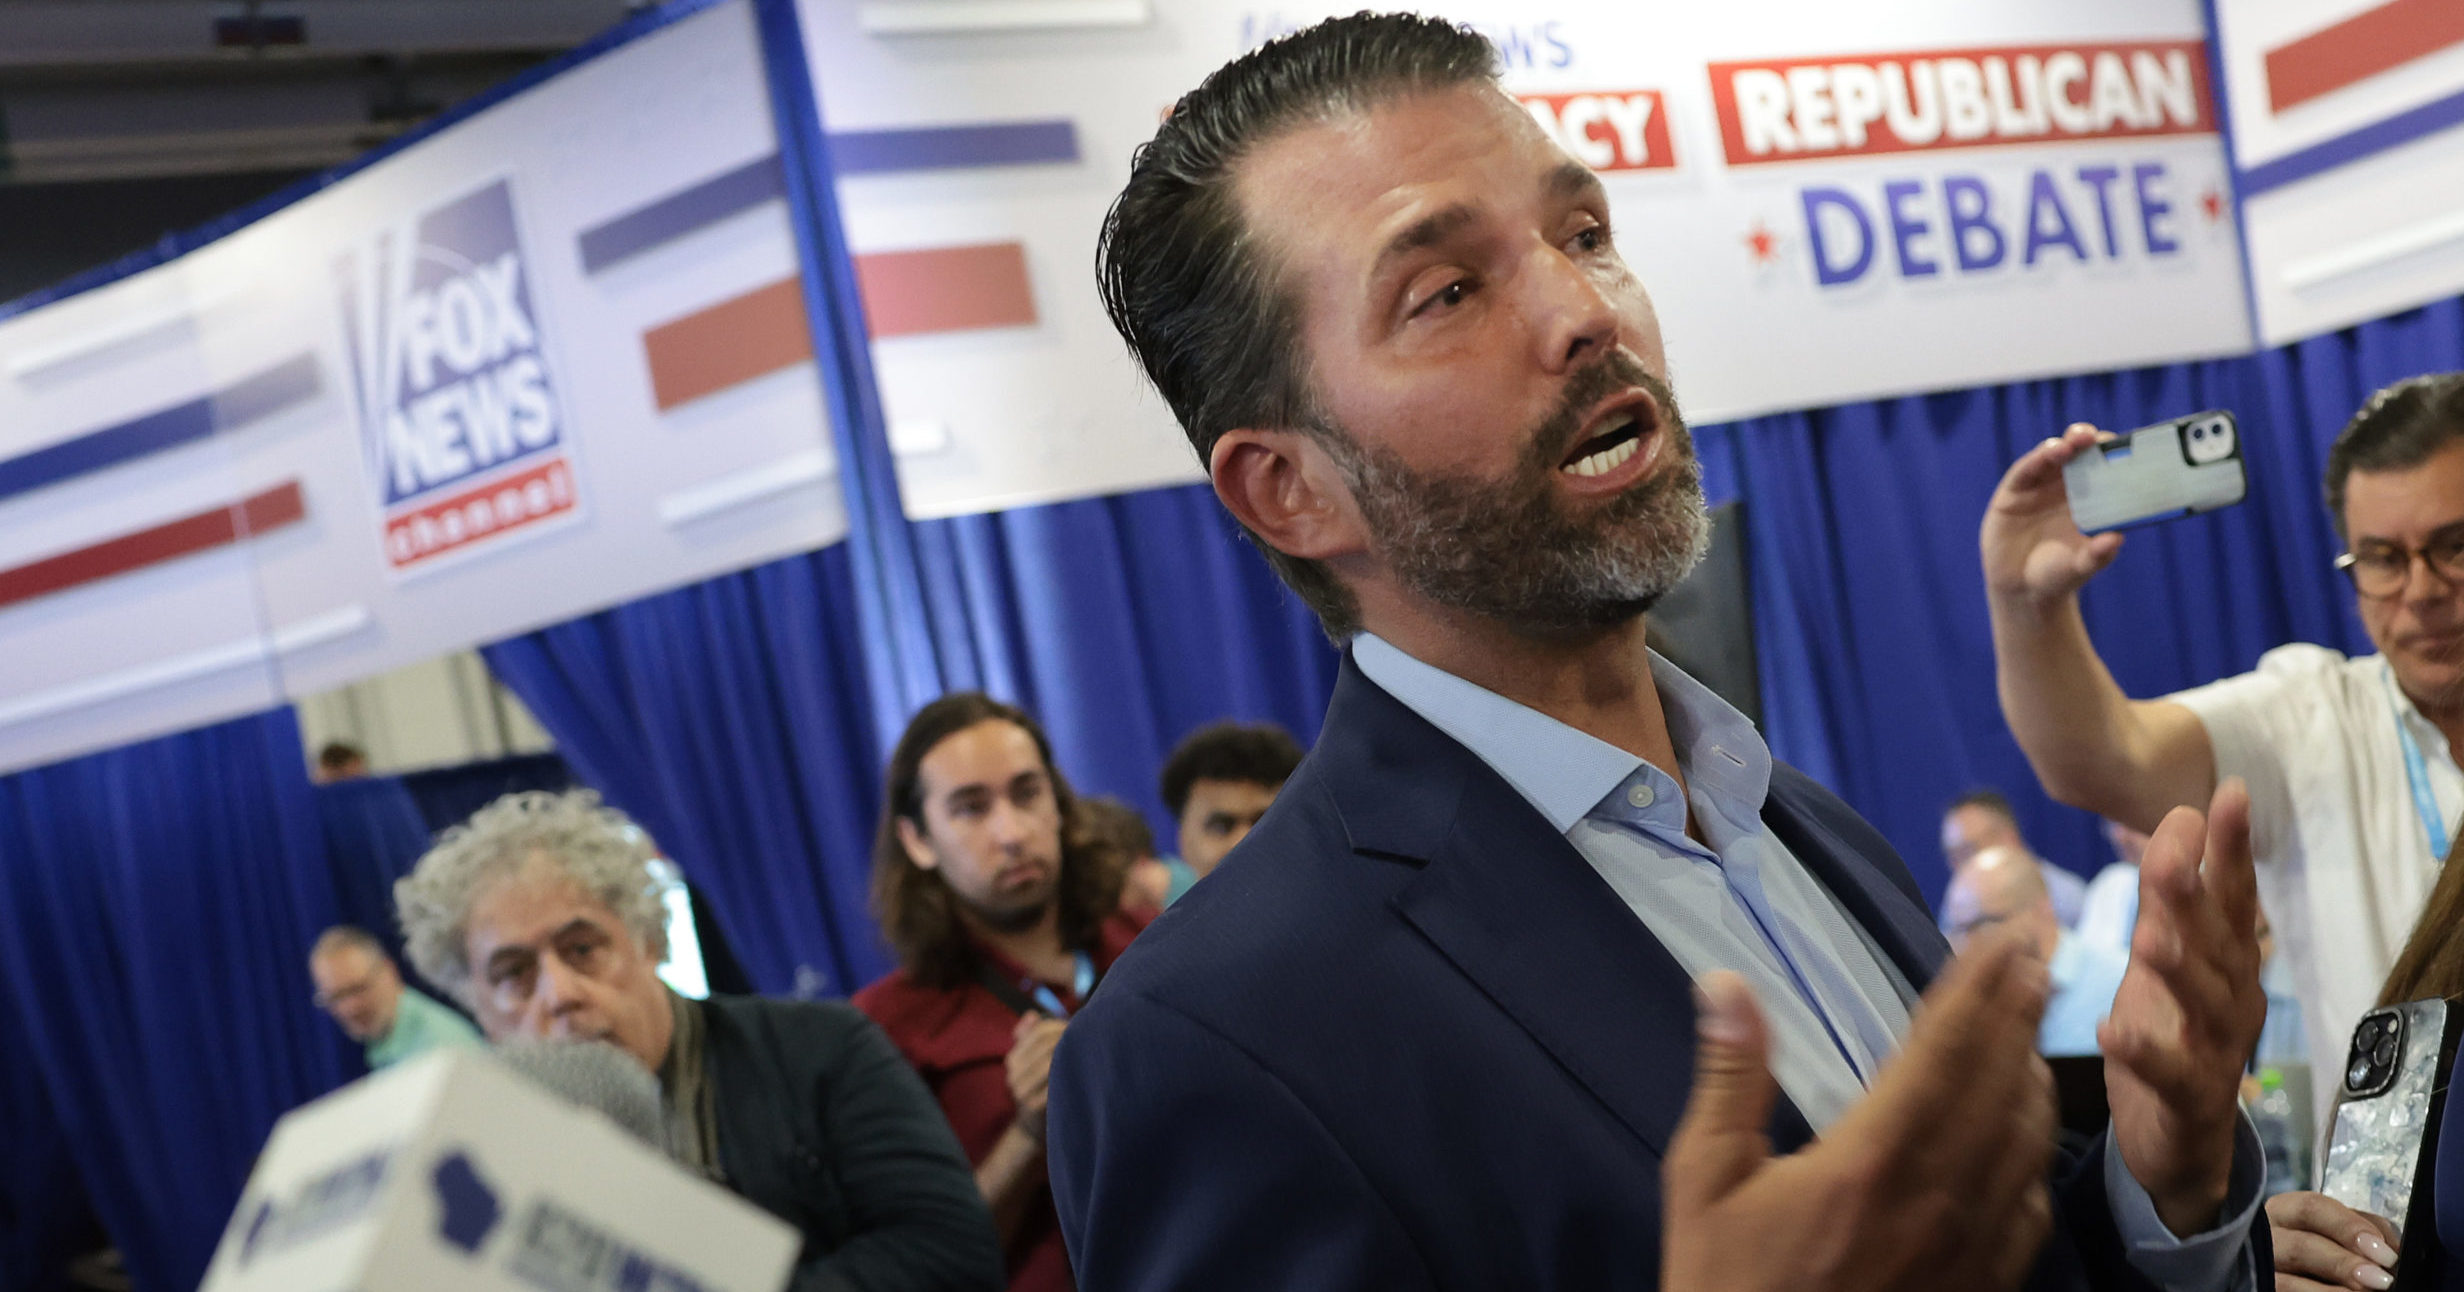 Donald Trump Jr., the eldest son of former President Donald Trump, talks to members of the media following the first debate of the GOP primary race at the Fiserv Forum in Milwaukee, on Wednesday.